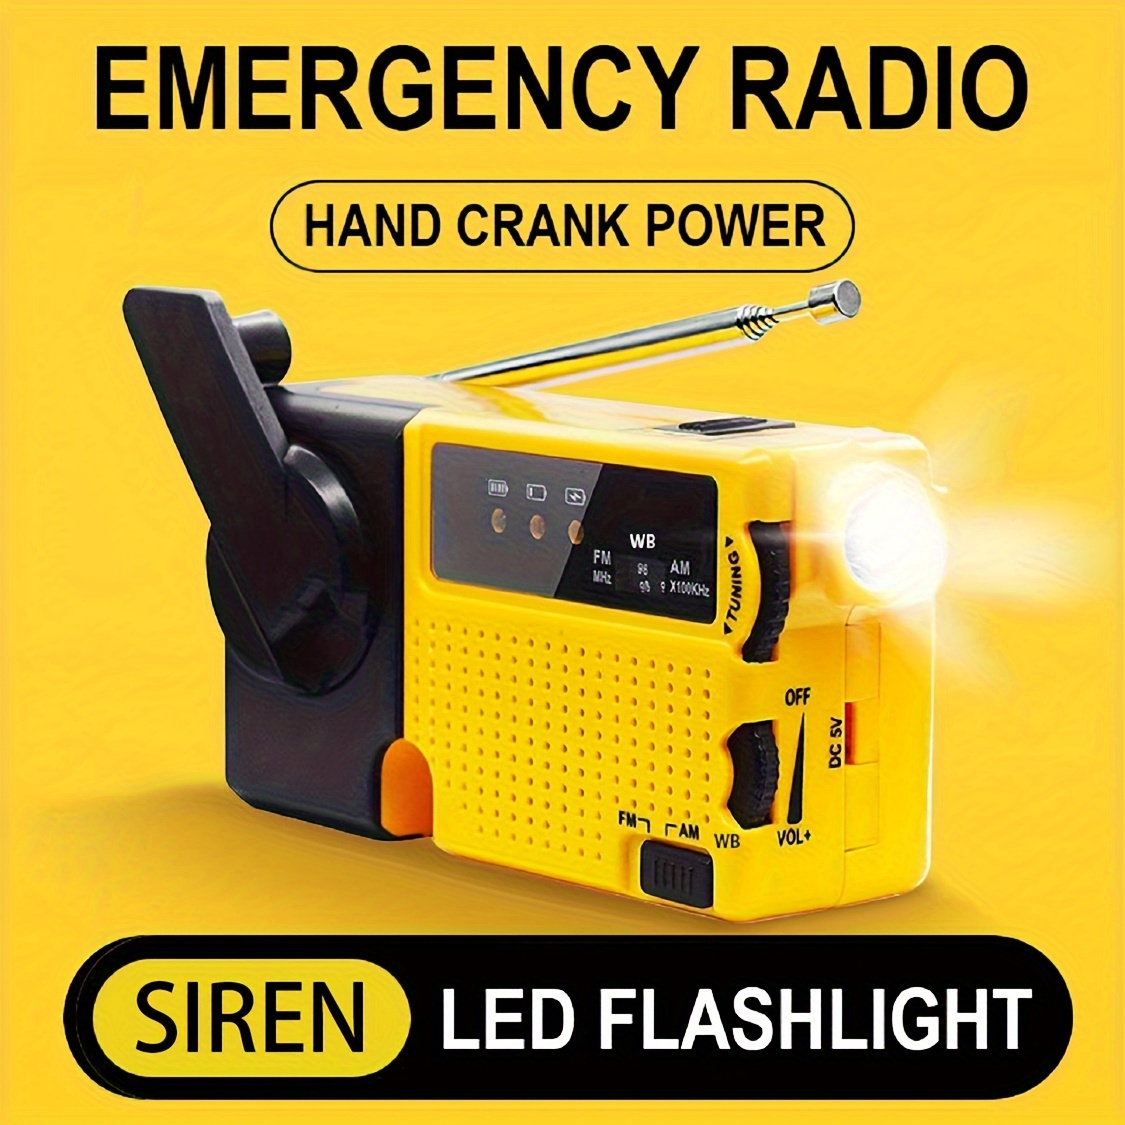 

Portable Mini Hand Cranked Power Emergency Radio Am/fm/noaa Weather Channel With Led Flashlight, Alarm, Charging/dry Battery Dual Mode